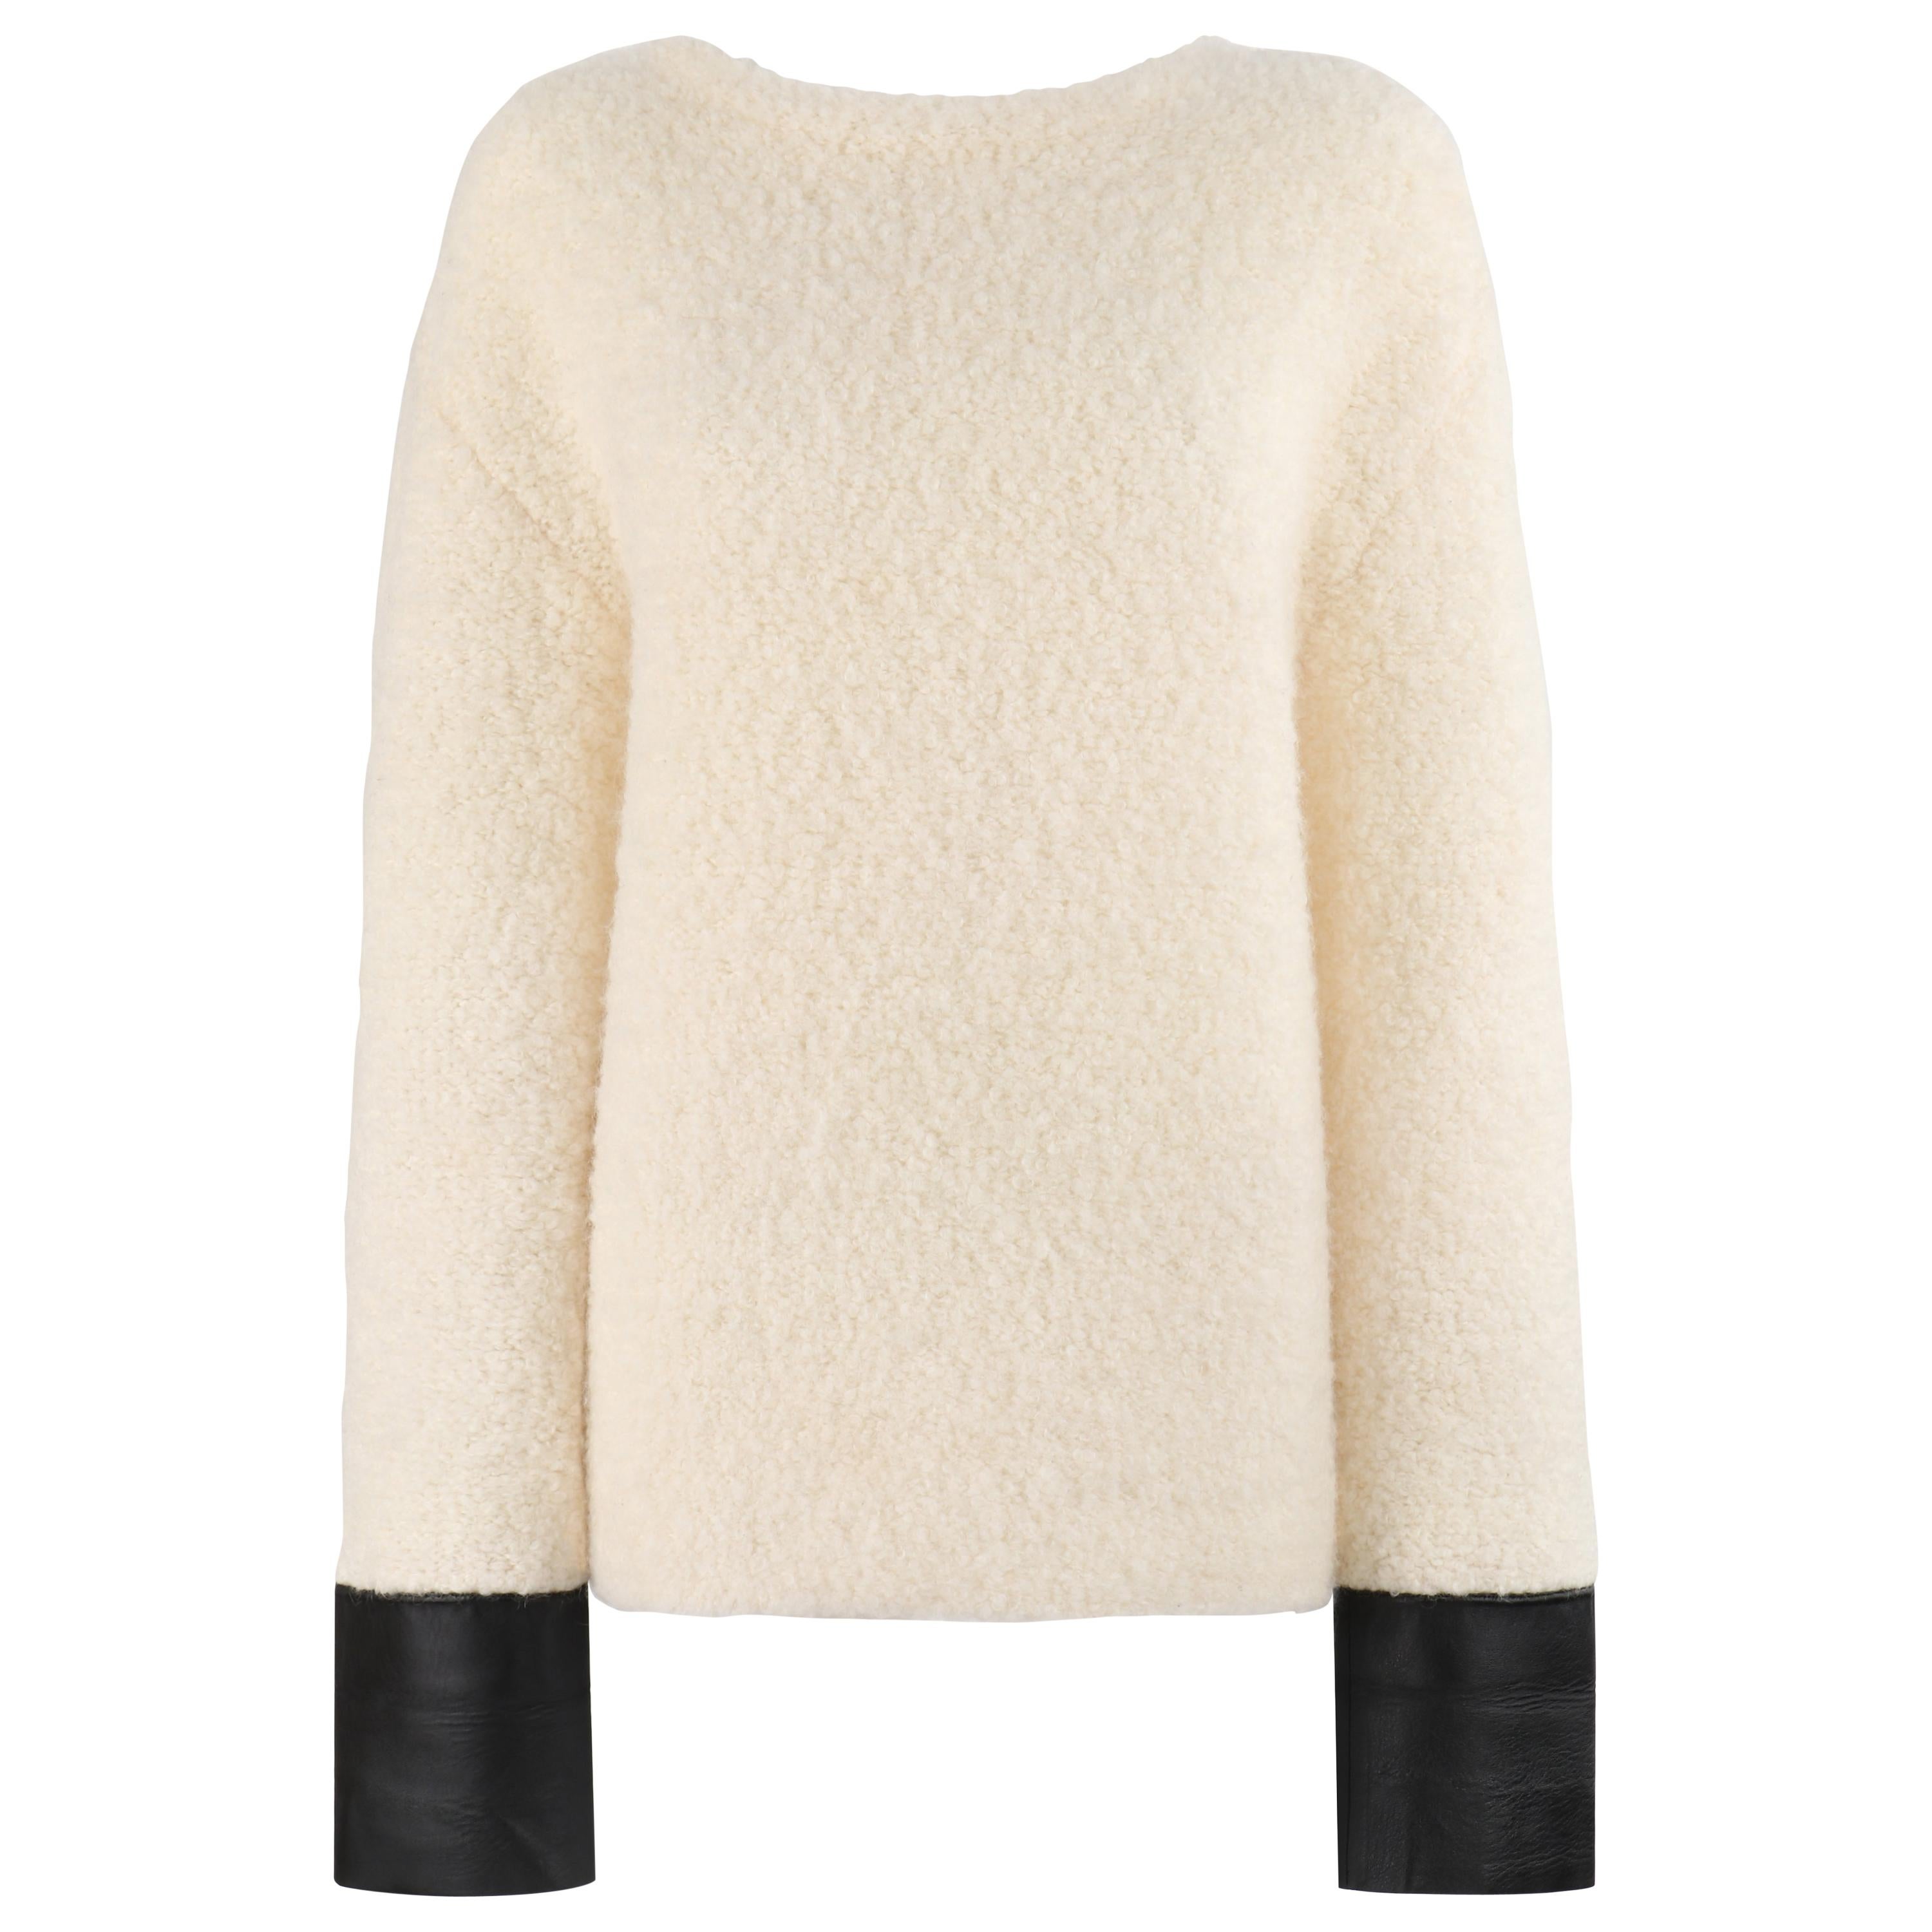 GUCCI Cream Boucle Alpaca Wool Knit Leather Cuffs Oversize Pullover Sweater